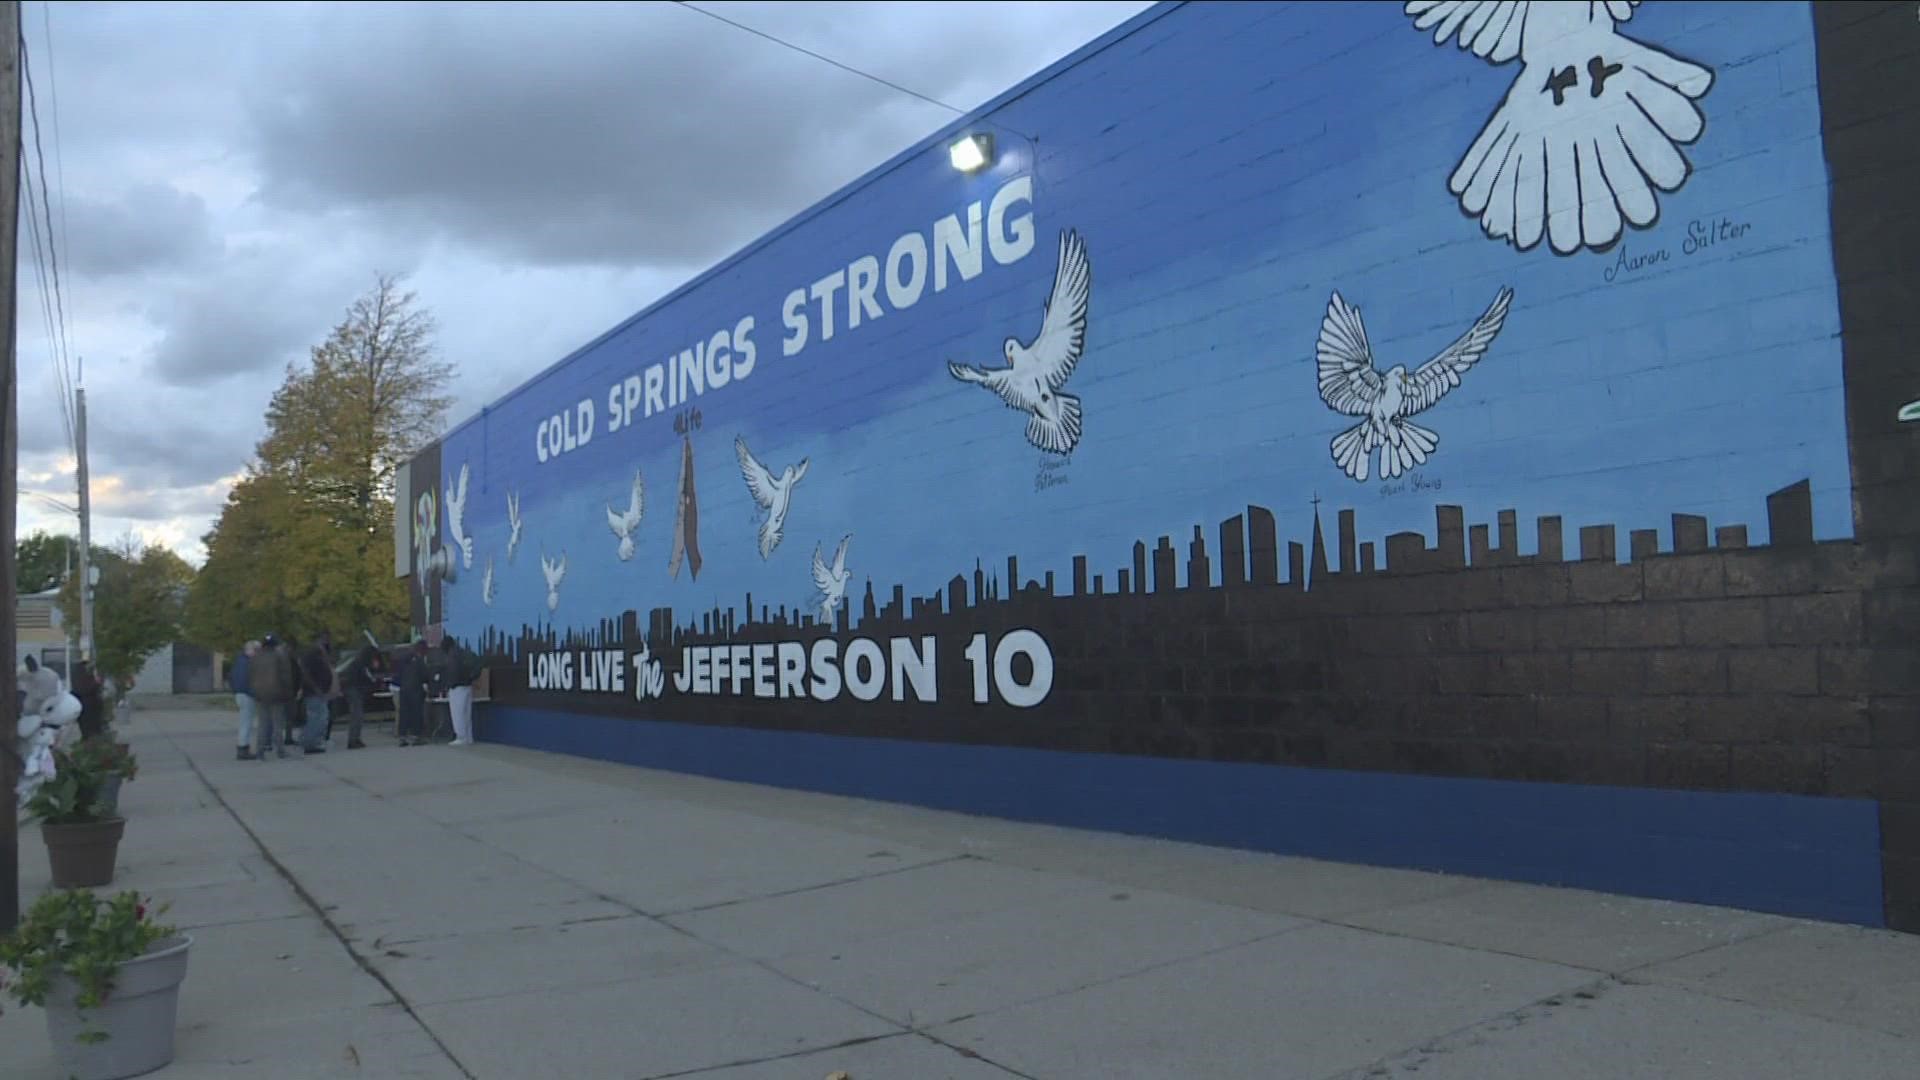 A new mural paying tribute to the Jefferson 10